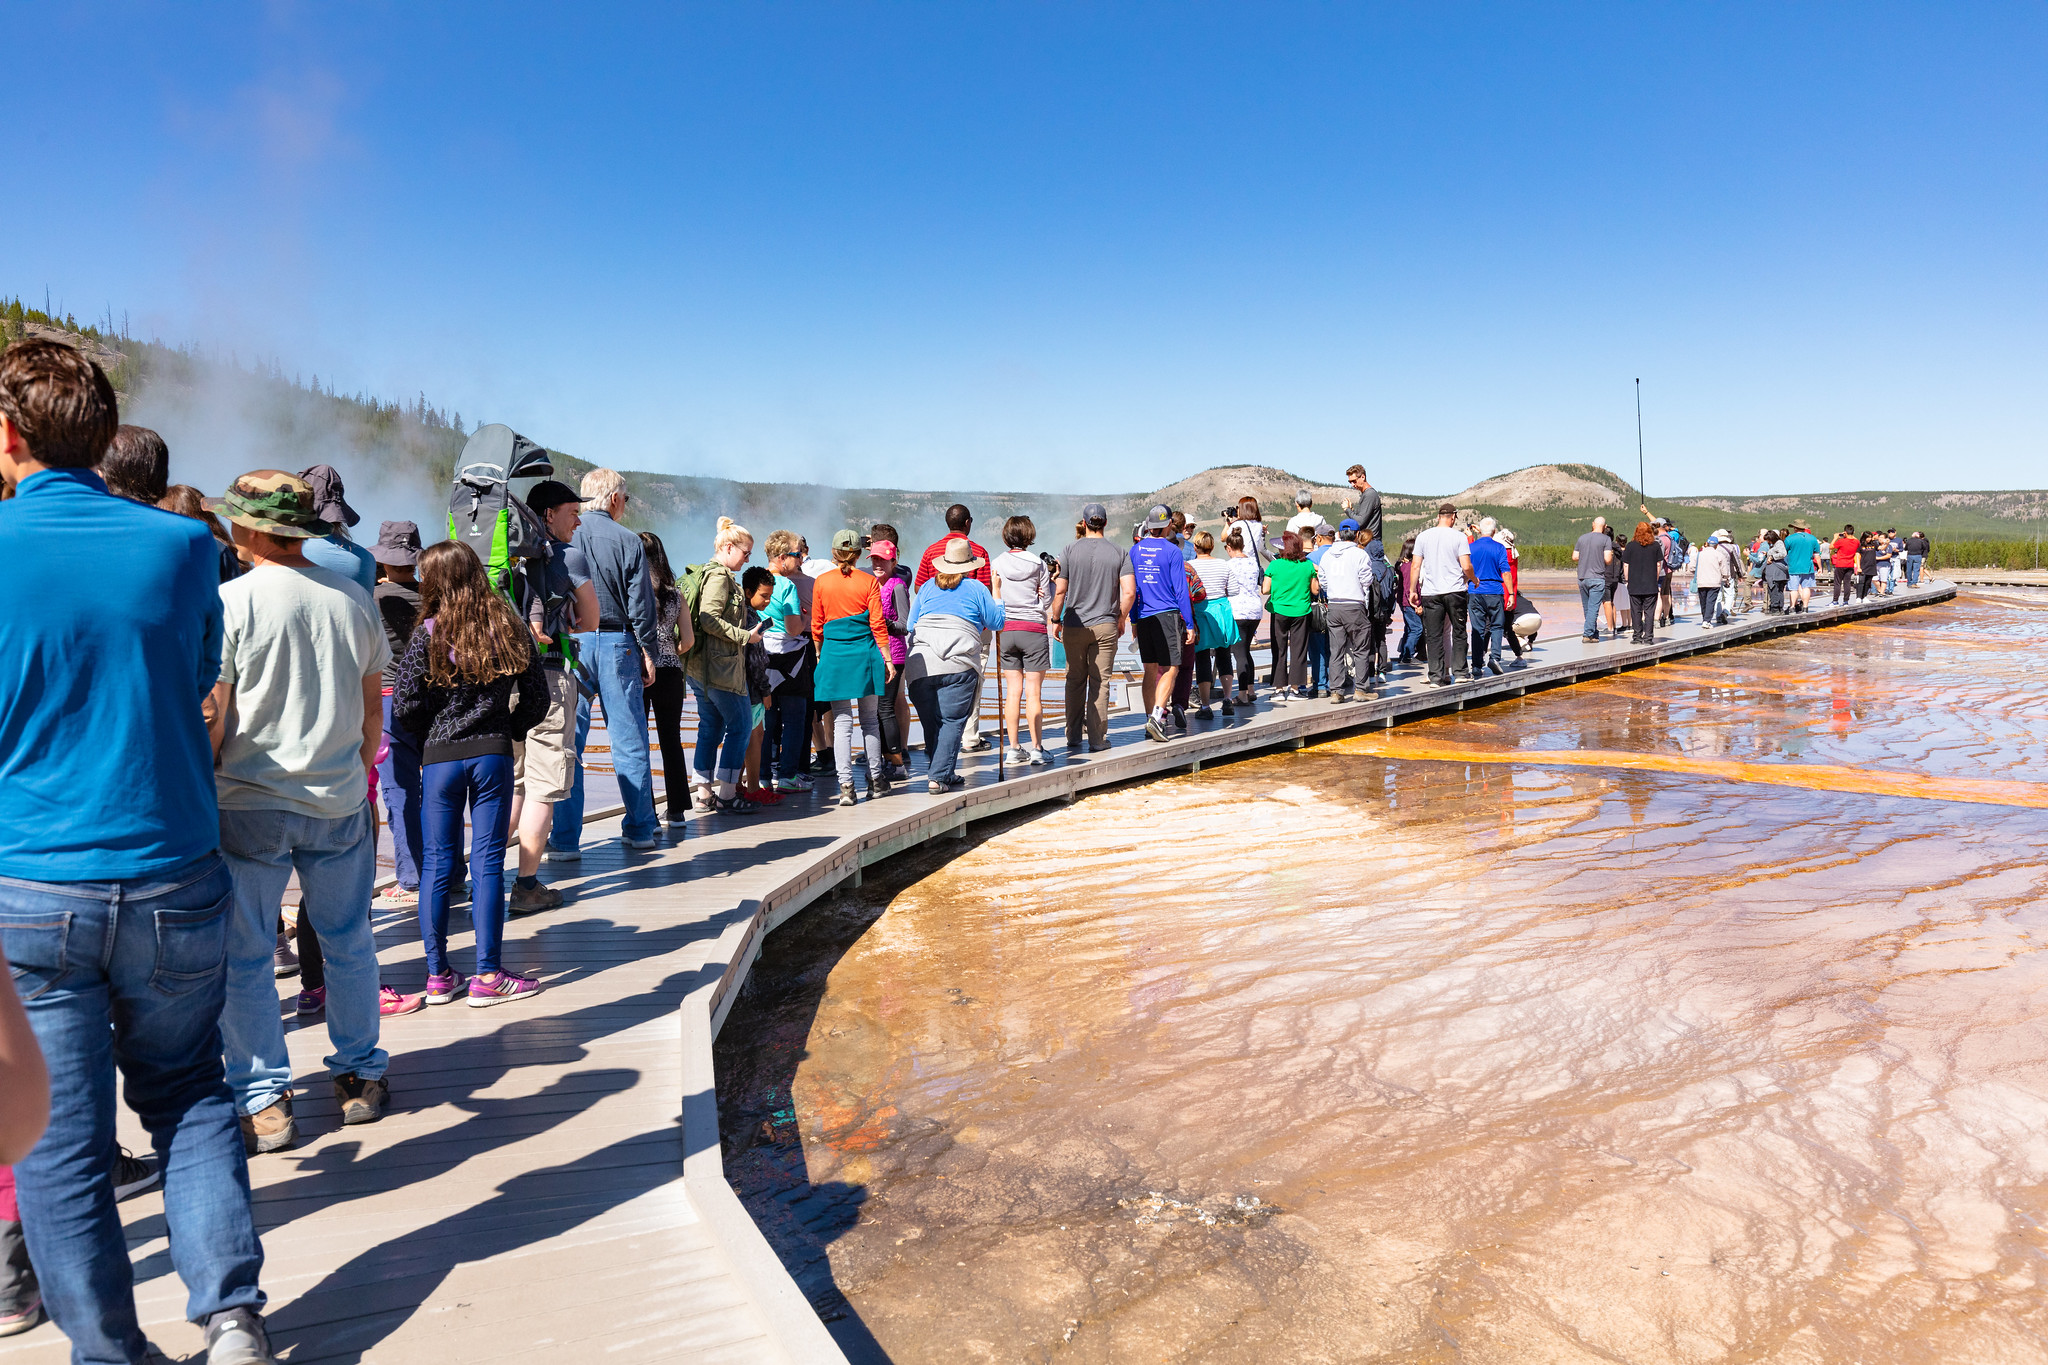 Crowd of visitors on boardwalk in thermal area